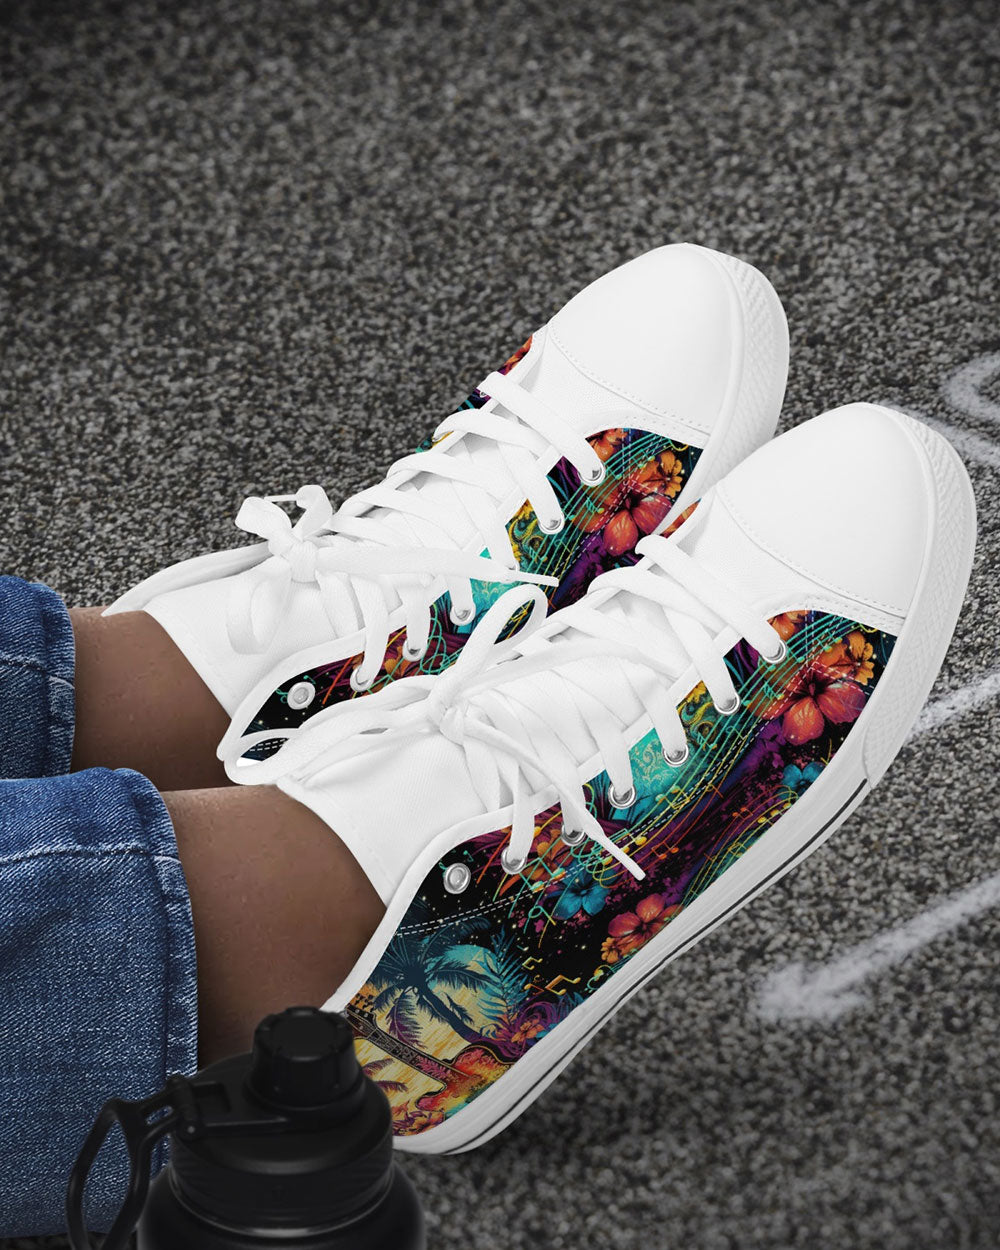 FIND ME WHERE THE MUSIC MEETS THE OCEAN GUITAR HIGH TOP CANVAS SHOES - TLNO1305232